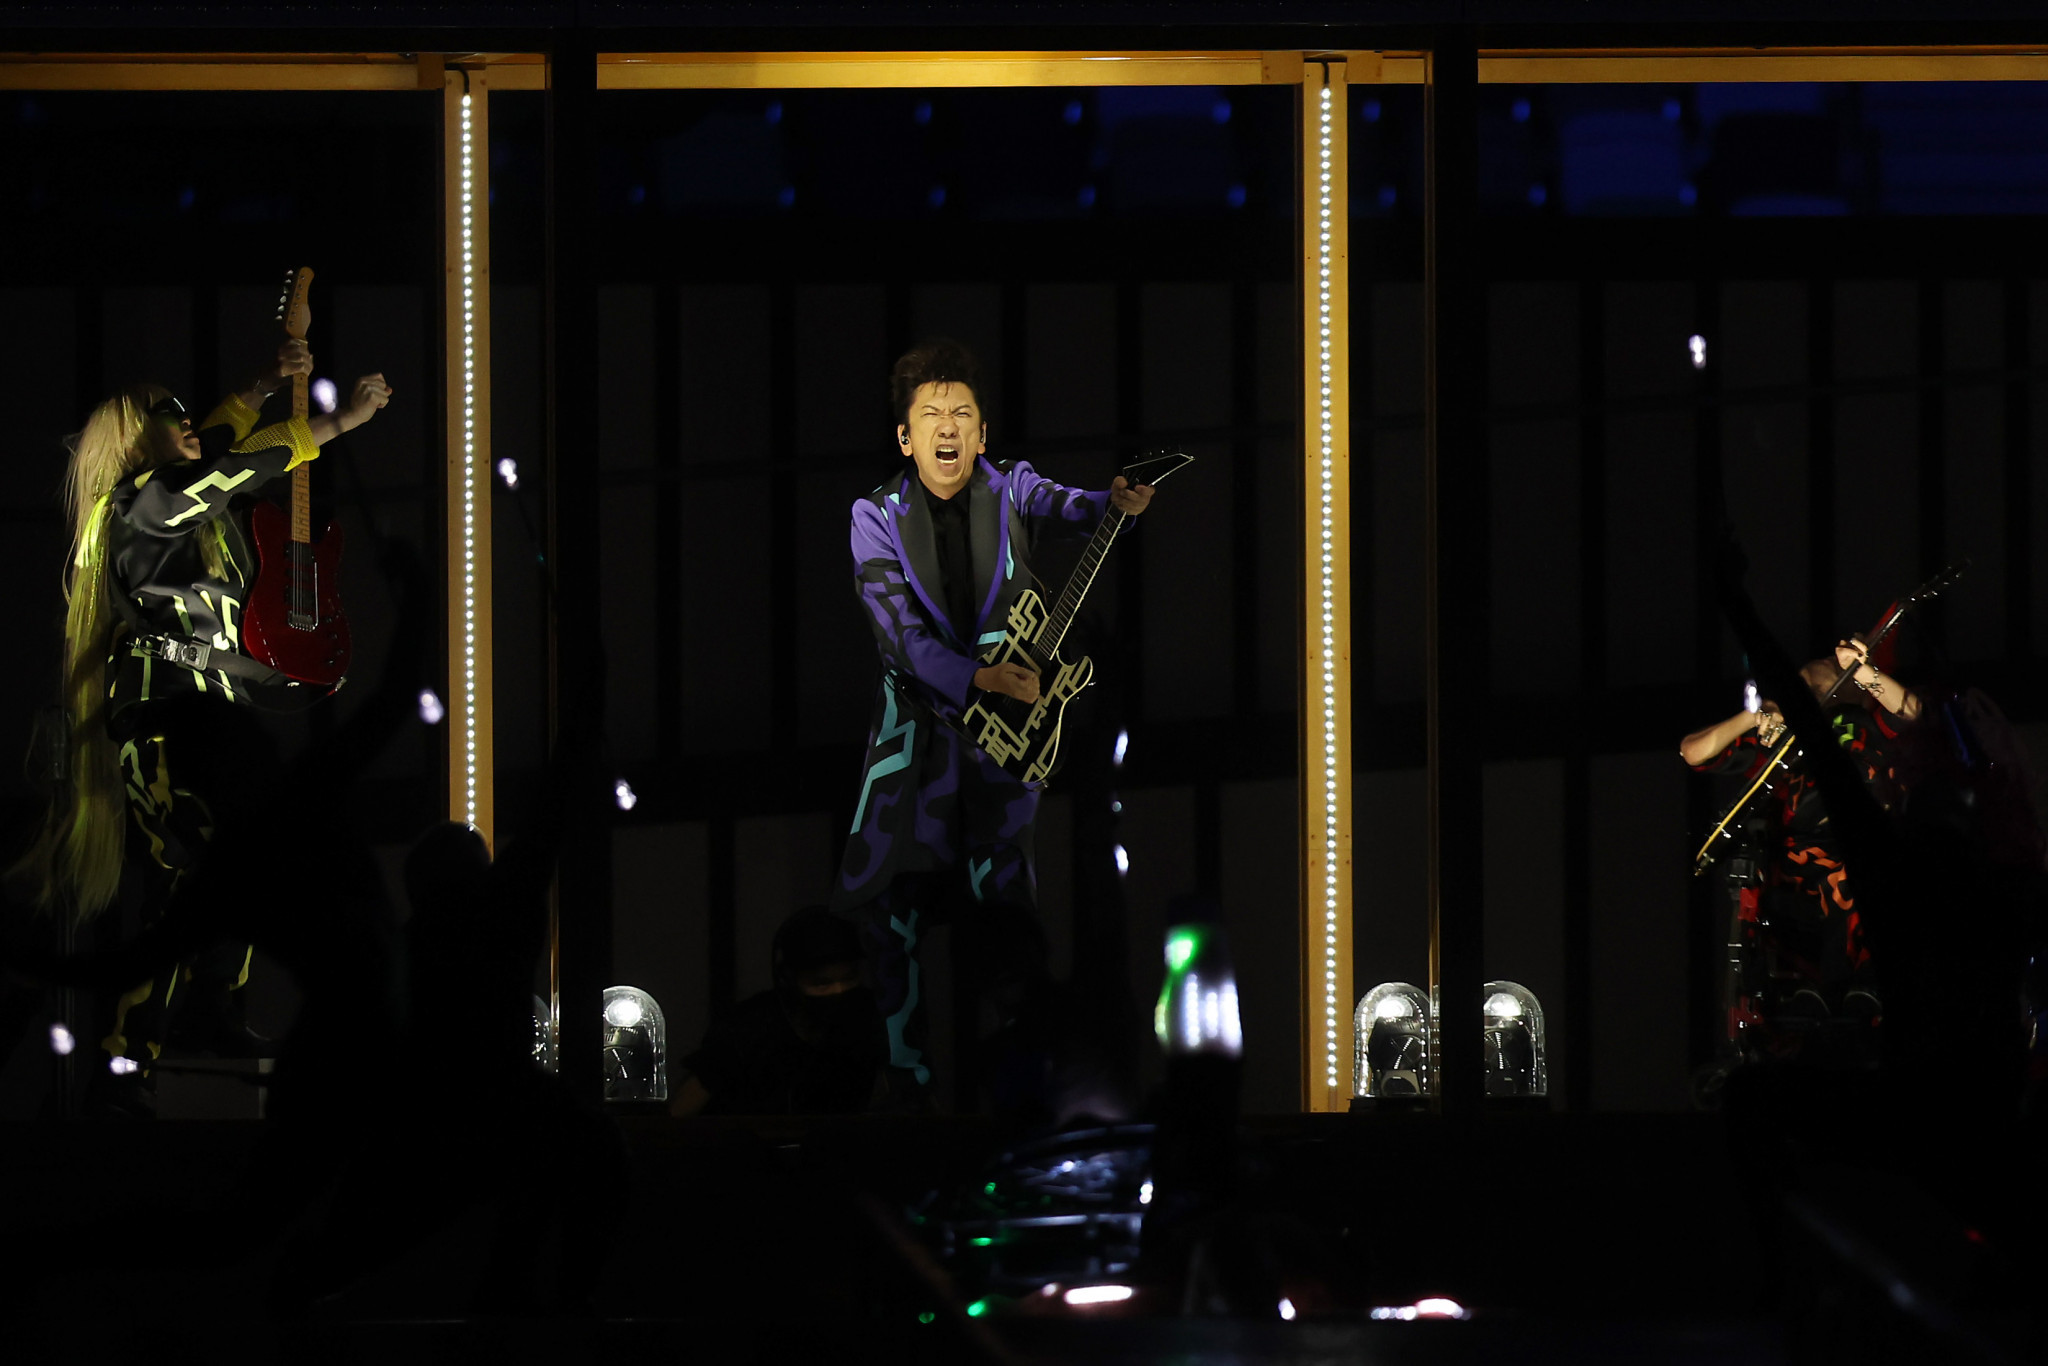 Japanese musician Tomoyasu Hotei was among the performers at the Opening Ceremony, who were drawn mainly from the host nation ©Getty Images